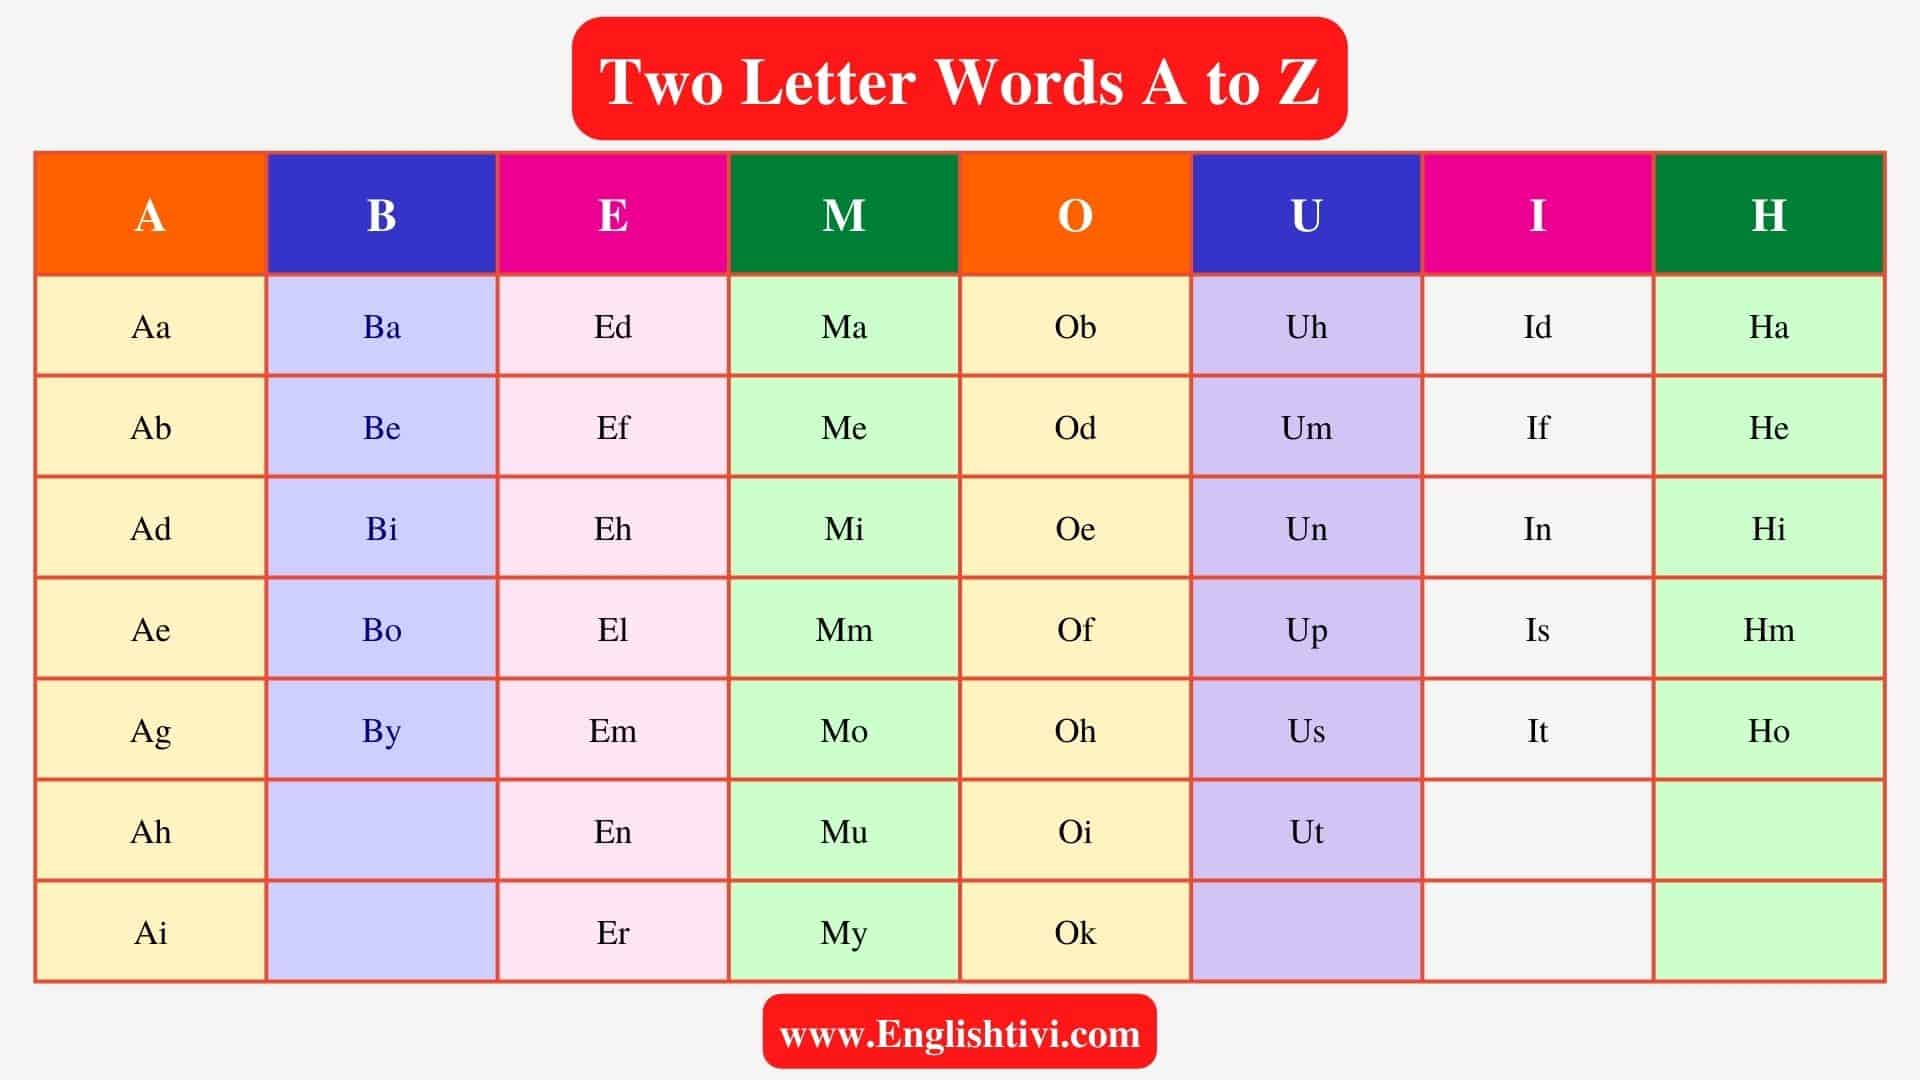 Z Words Two Letter